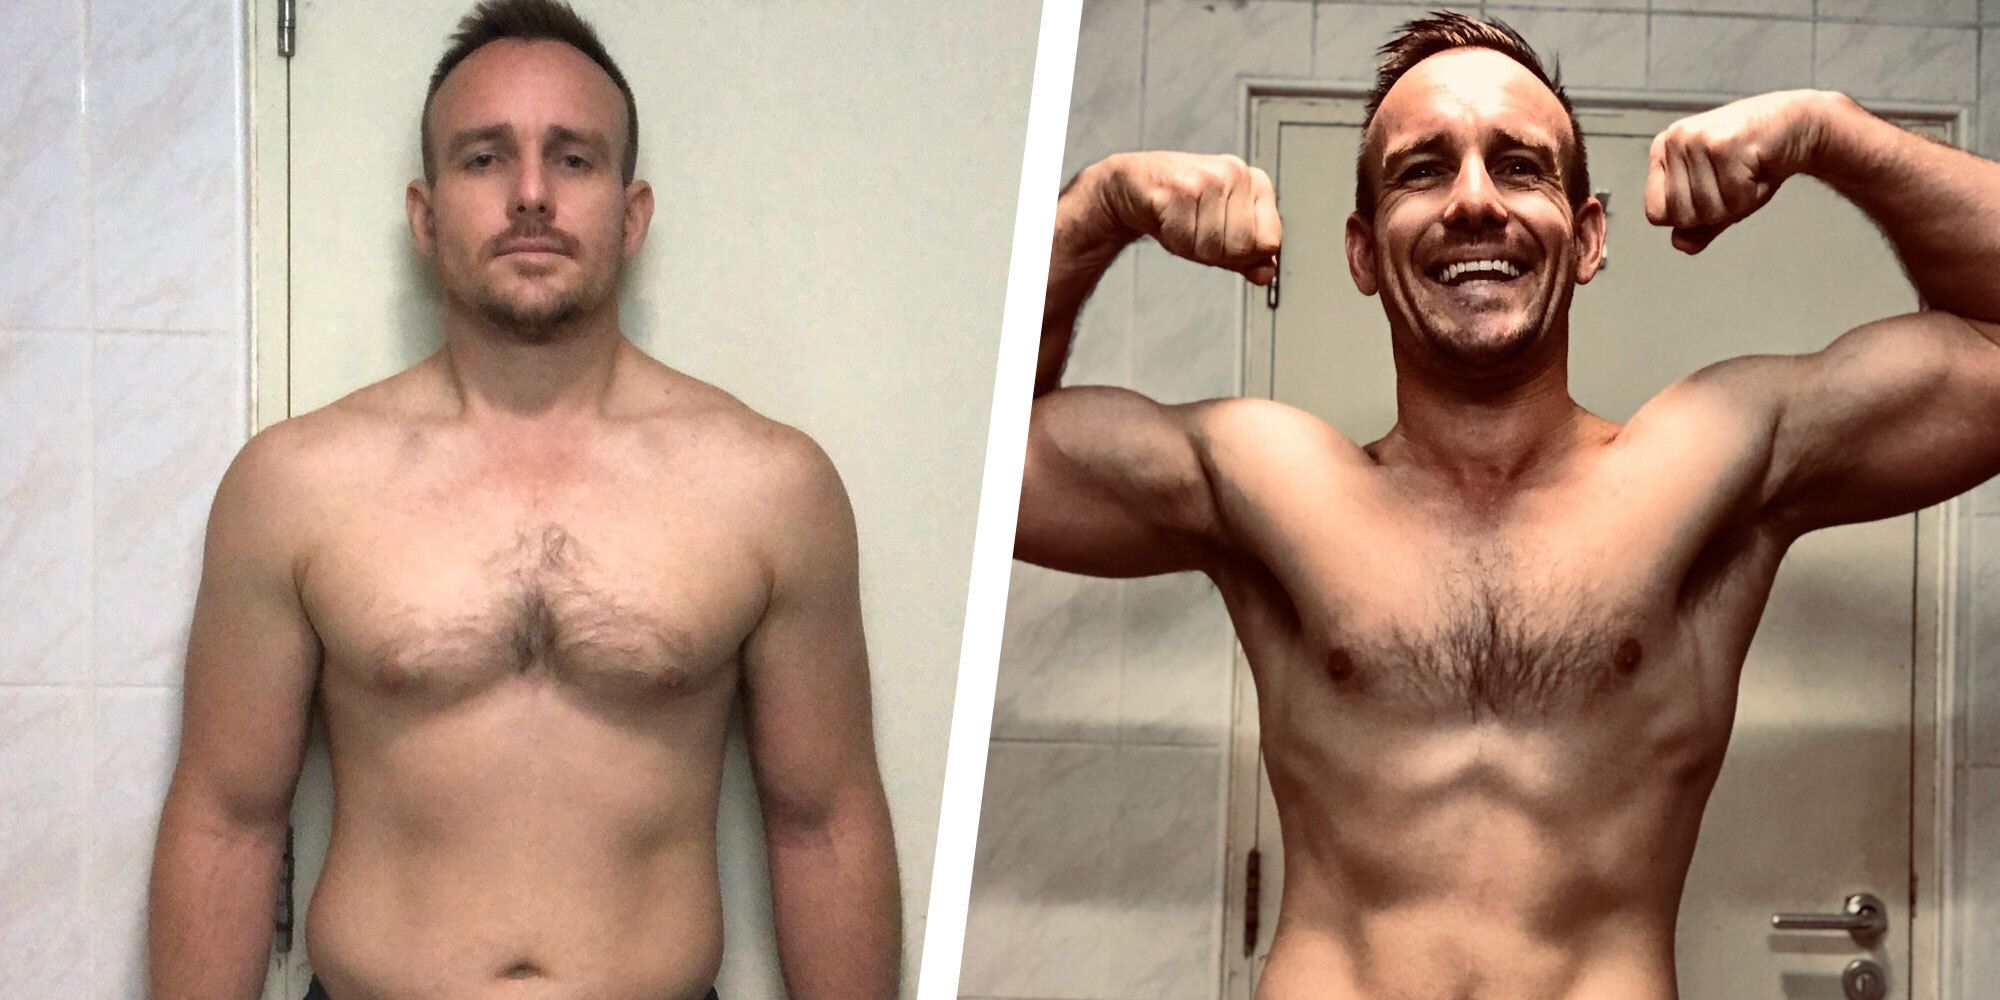 This Man Explains How He Lost 15 Pounds And Got Fit In 90 Days